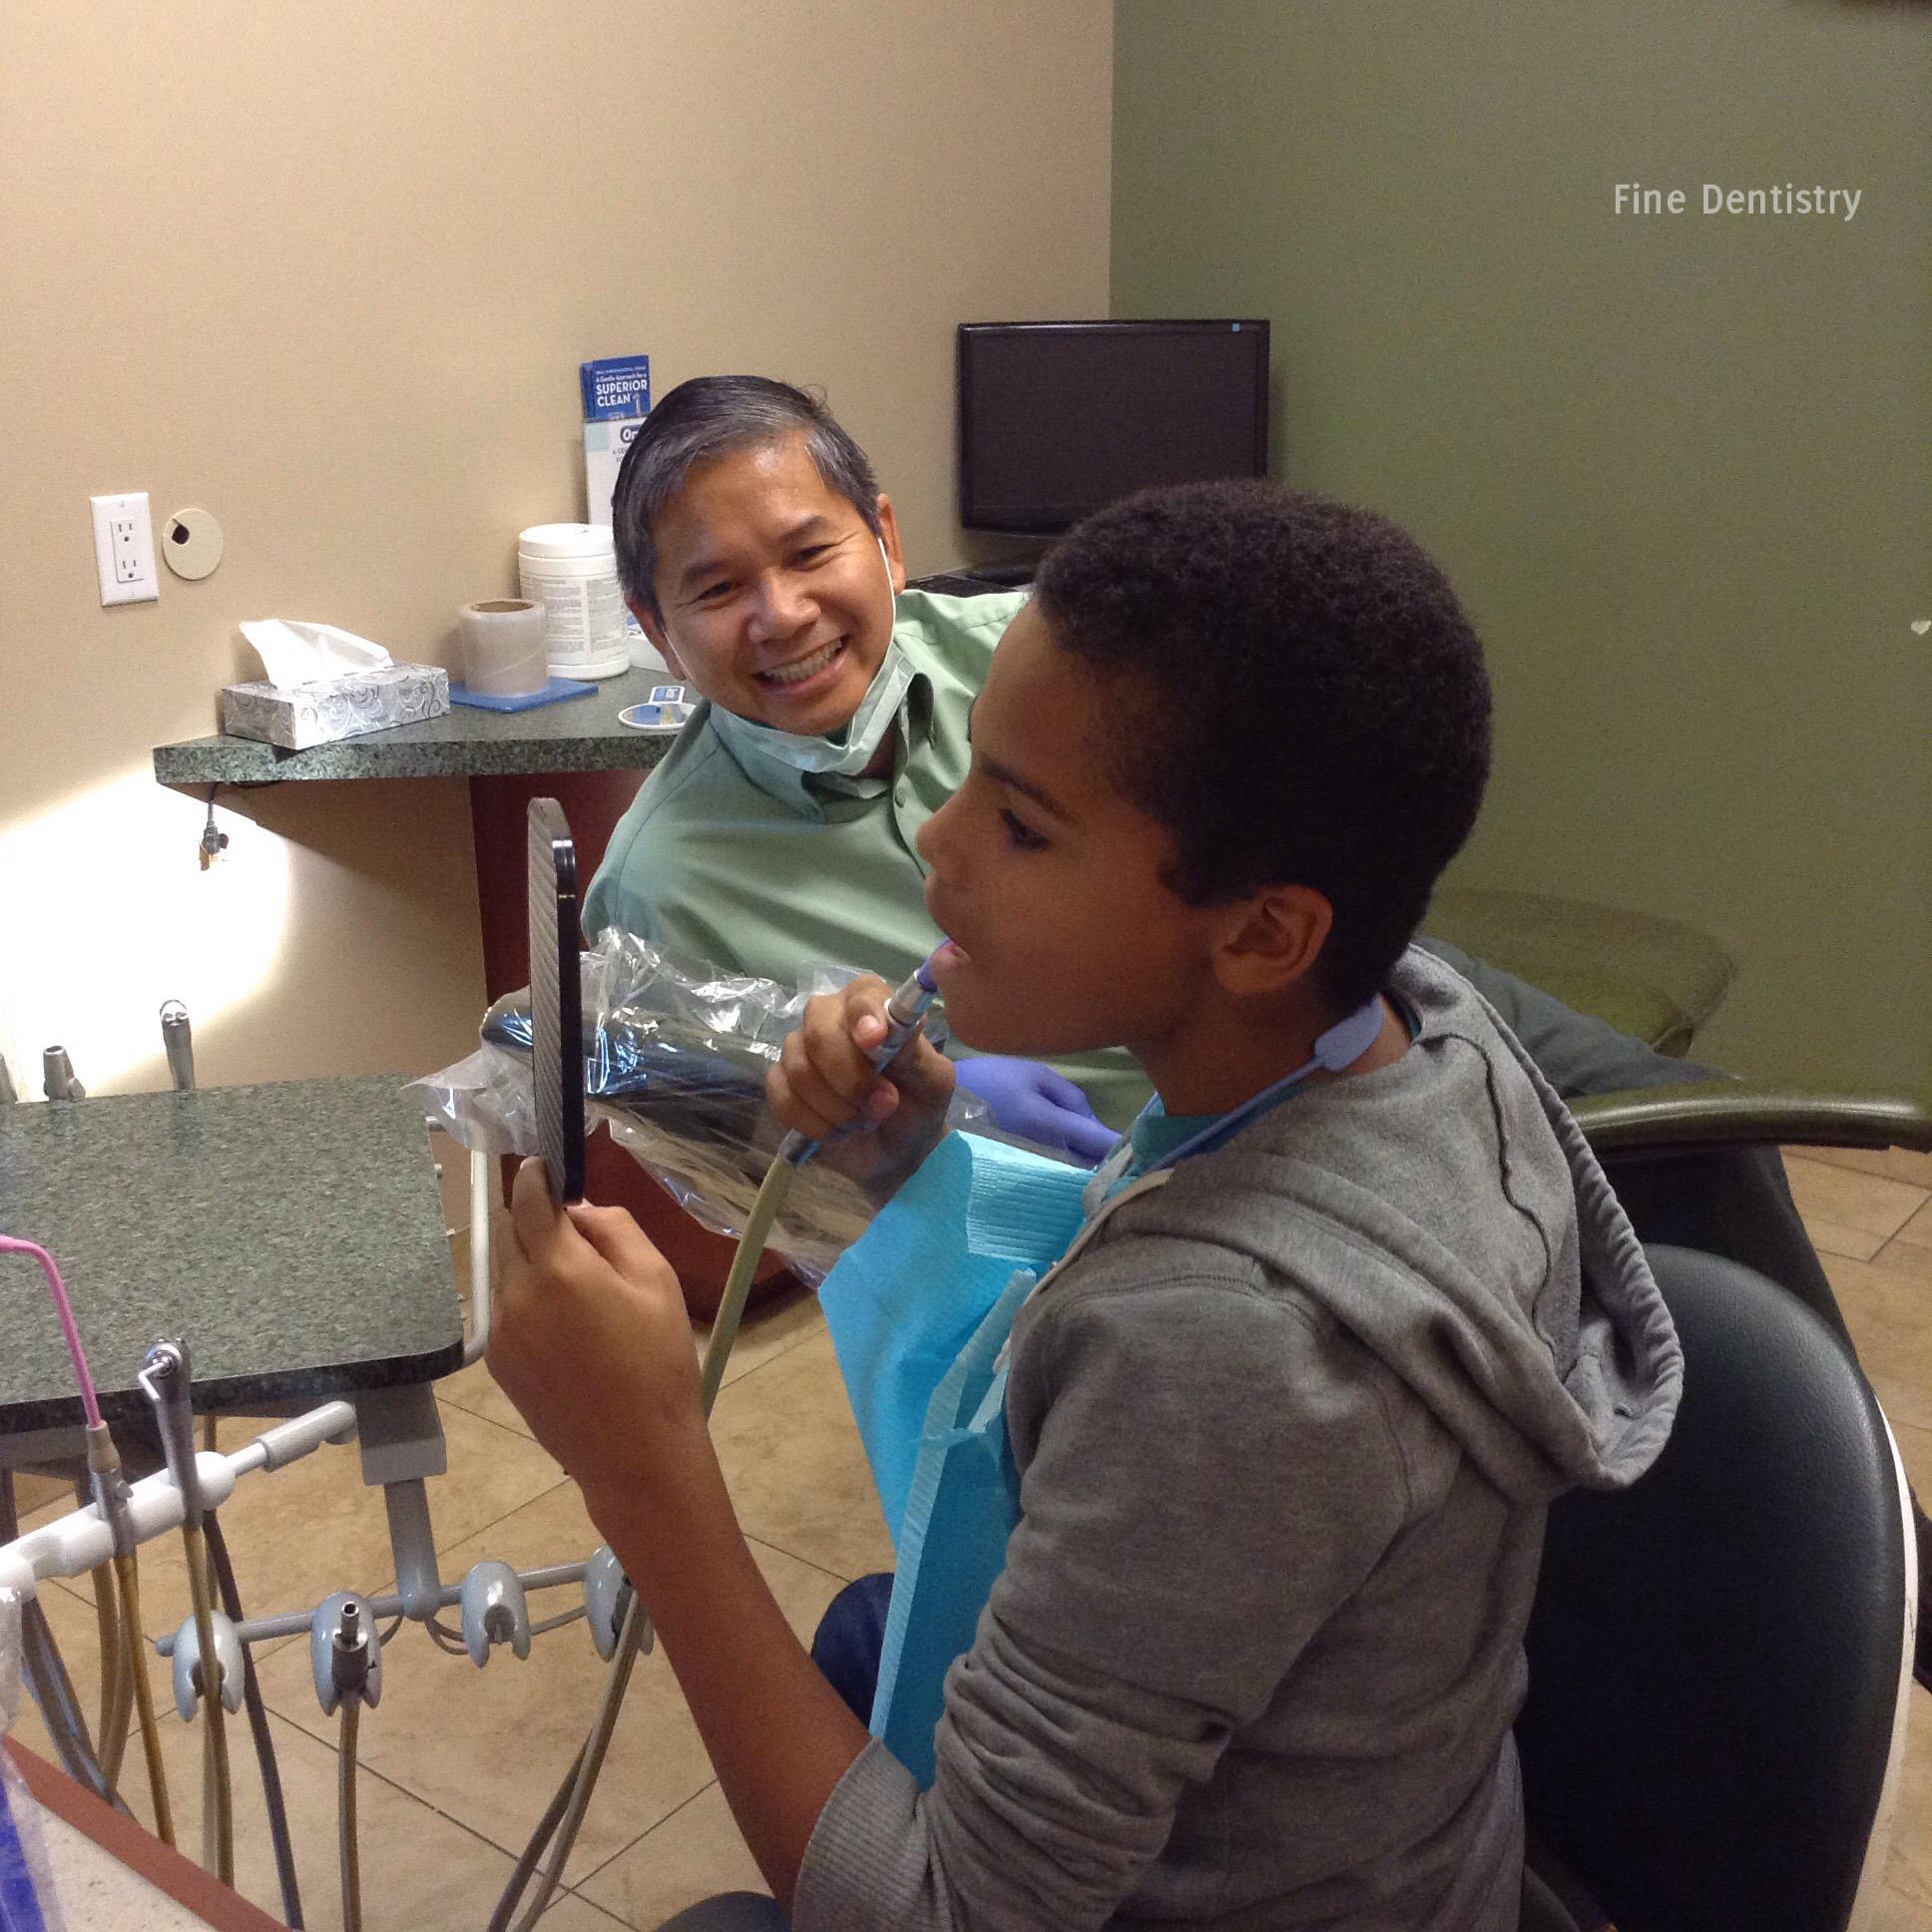 Dr. Henry Phan and patient at Fine Dentistry | Chandler, AZ